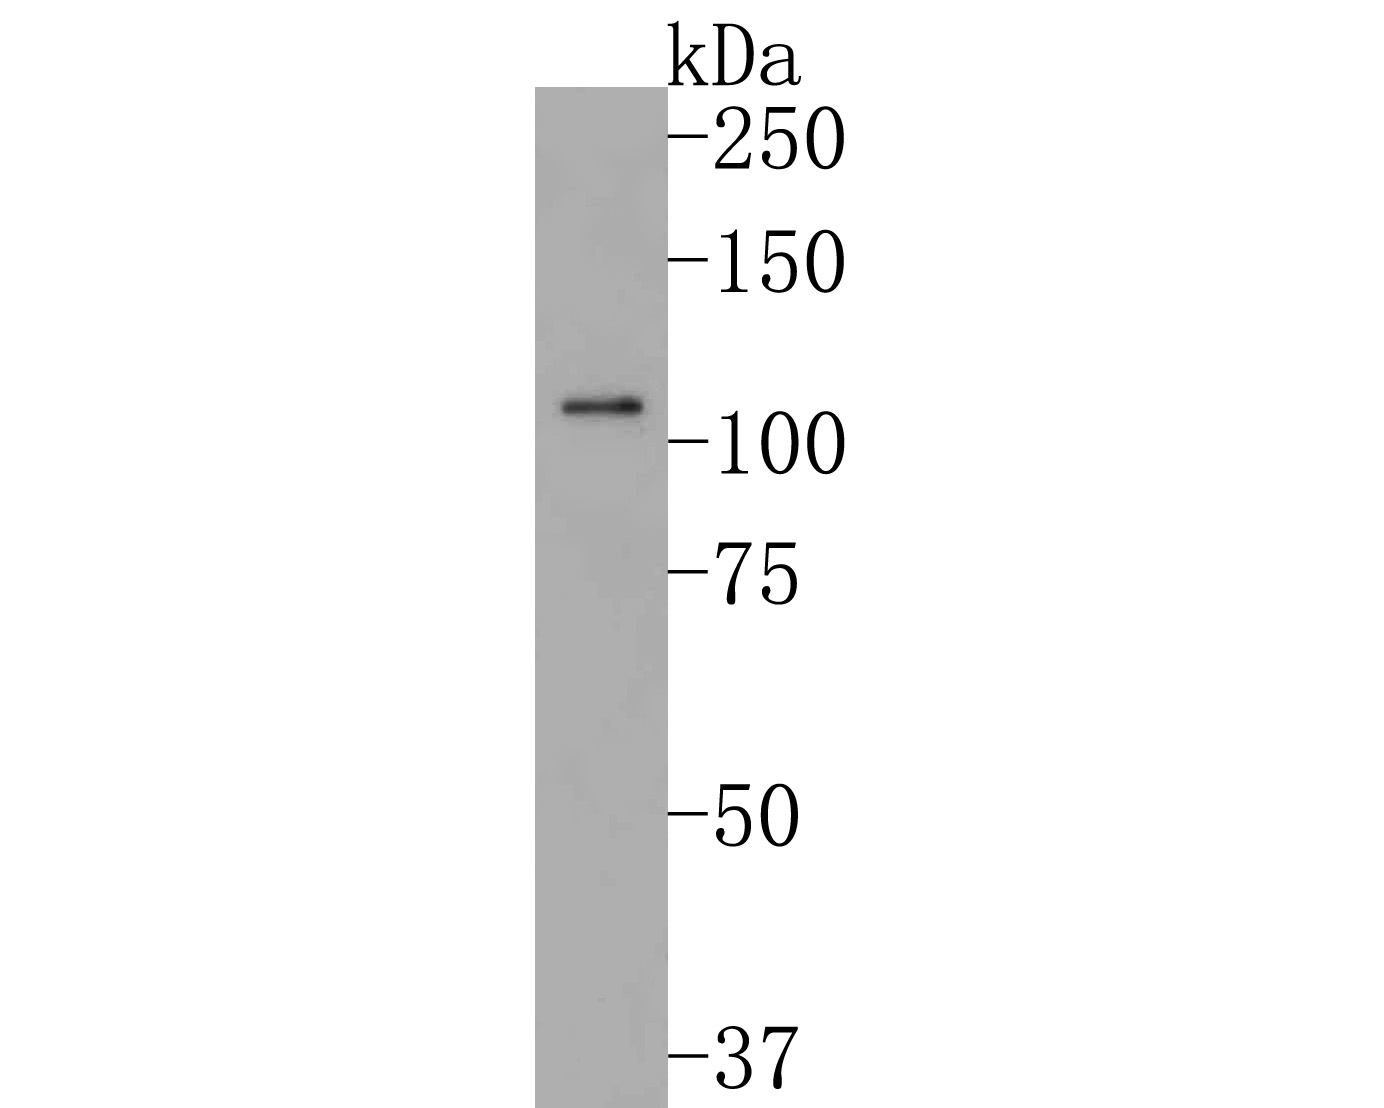 Western blot analysis of Sall4 on CAL-62 cell lysates. Proteins were transferred to a PVDF membrane and blocked with 5% NFDM/TBST for 1 hour at room temperature. The primary antibody (HA500482, 1/1,000) was used in 5% NFDM/TBST at room temperature for 2 hours. Goat Anti-Rabbit IgG - HRP Secondary Antibody (HA1001) at 1:200,000 dilution was used for 1 hour at room temperature.